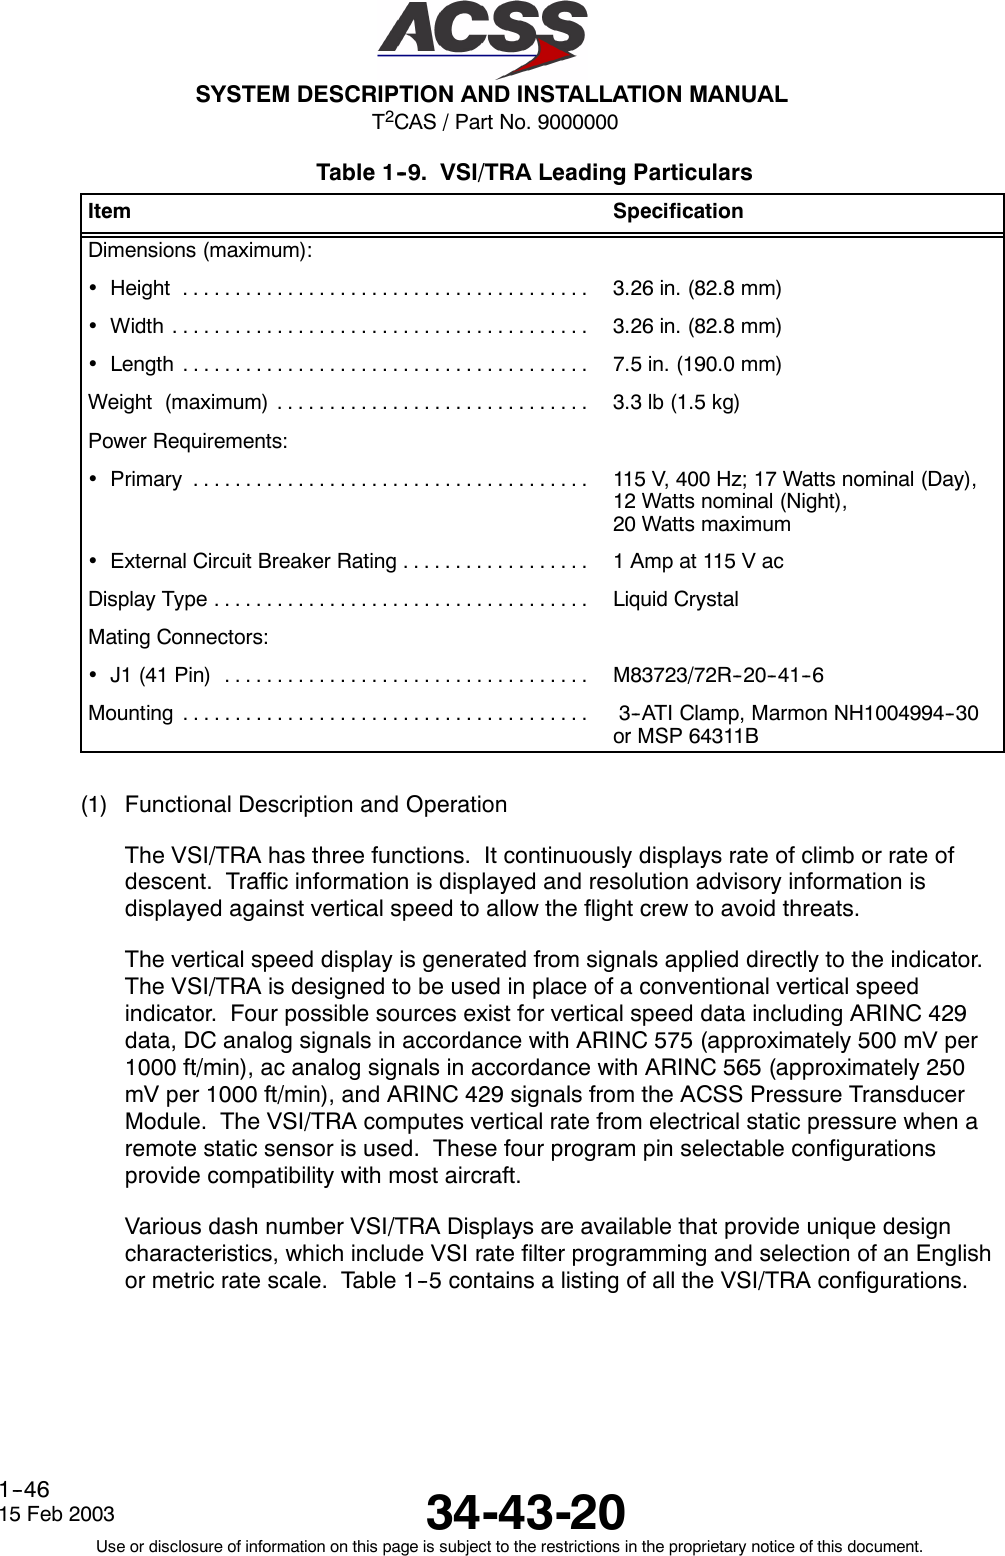 T2CAS / Part No. 9000000SYSTEM DESCRIPTION AND INSTALLATION MANUAL34-43-2015 Feb 2003Use or disclosure of information on this page is subject to the restrictions in the proprietary notice of this document.1--46Table 1--9. VSI/TRA Leading ParticularsItem SpecificationDimensions (maximum):•Height ....................................... 3.26 in. (82.8 mm)•Width ........................................ 3.26 in. (82.8 mm)•Length ....................................... 7.5 in. (190.0 mm)Weight (maximum) .............................. 3.3lb(1.5kg)Power Requirements:•Primary ...................................... 115 V, 400 Hz; 17 Watts nominal (Day),12 Watts nominal (Night),20 Watts maximum•ExternalCircuitBreakerRating.................. 1Ampat115VacDisplayType.................................... Liquid CrystalMating Connectors:•J1(41Pin) ................................... M83723/72R--20--41--6Mounting ....................................... 3--ATI Clamp, Marmon NH1004994--30or MSP 64311B(1) Functional Description and OperationThe VSI/TRA has three functions. It continuously displays rate of climb or rate ofdescent. Traffic information is displayed and resolution advisory information isdisplayed against vertical speed to allow the flight crew to avoid threats.The vertical speed display is generated from signals applied directly to the indicator.The VSI/TRA is designed to be used in place of a conventional vertical speedindicator. Four possible sources exist for vertical speed data including ARINC 429data, DC analog signals in accordance with ARINC 575 (approximately 500 mV per1000 ft/min), ac analog signals in accordance with ARINC 565 (approximately 250mV per 1000 ft/min), and ARINC 429 signals from the ACSS Pressure TransducerModule. The VSI/TRA computes vertical rate from electrical static pressure when aremote static sensor is used. These four program pin selectable configurationsprovide compatibility with most aircraft.Various dash number VSI/TRA Displays are available that provide unique designcharacteristics, which include VSI rate filter programming and selection of an Englishor metric rate scale. Table 1--5 contains a listing of all the VSI/TRA configurations.